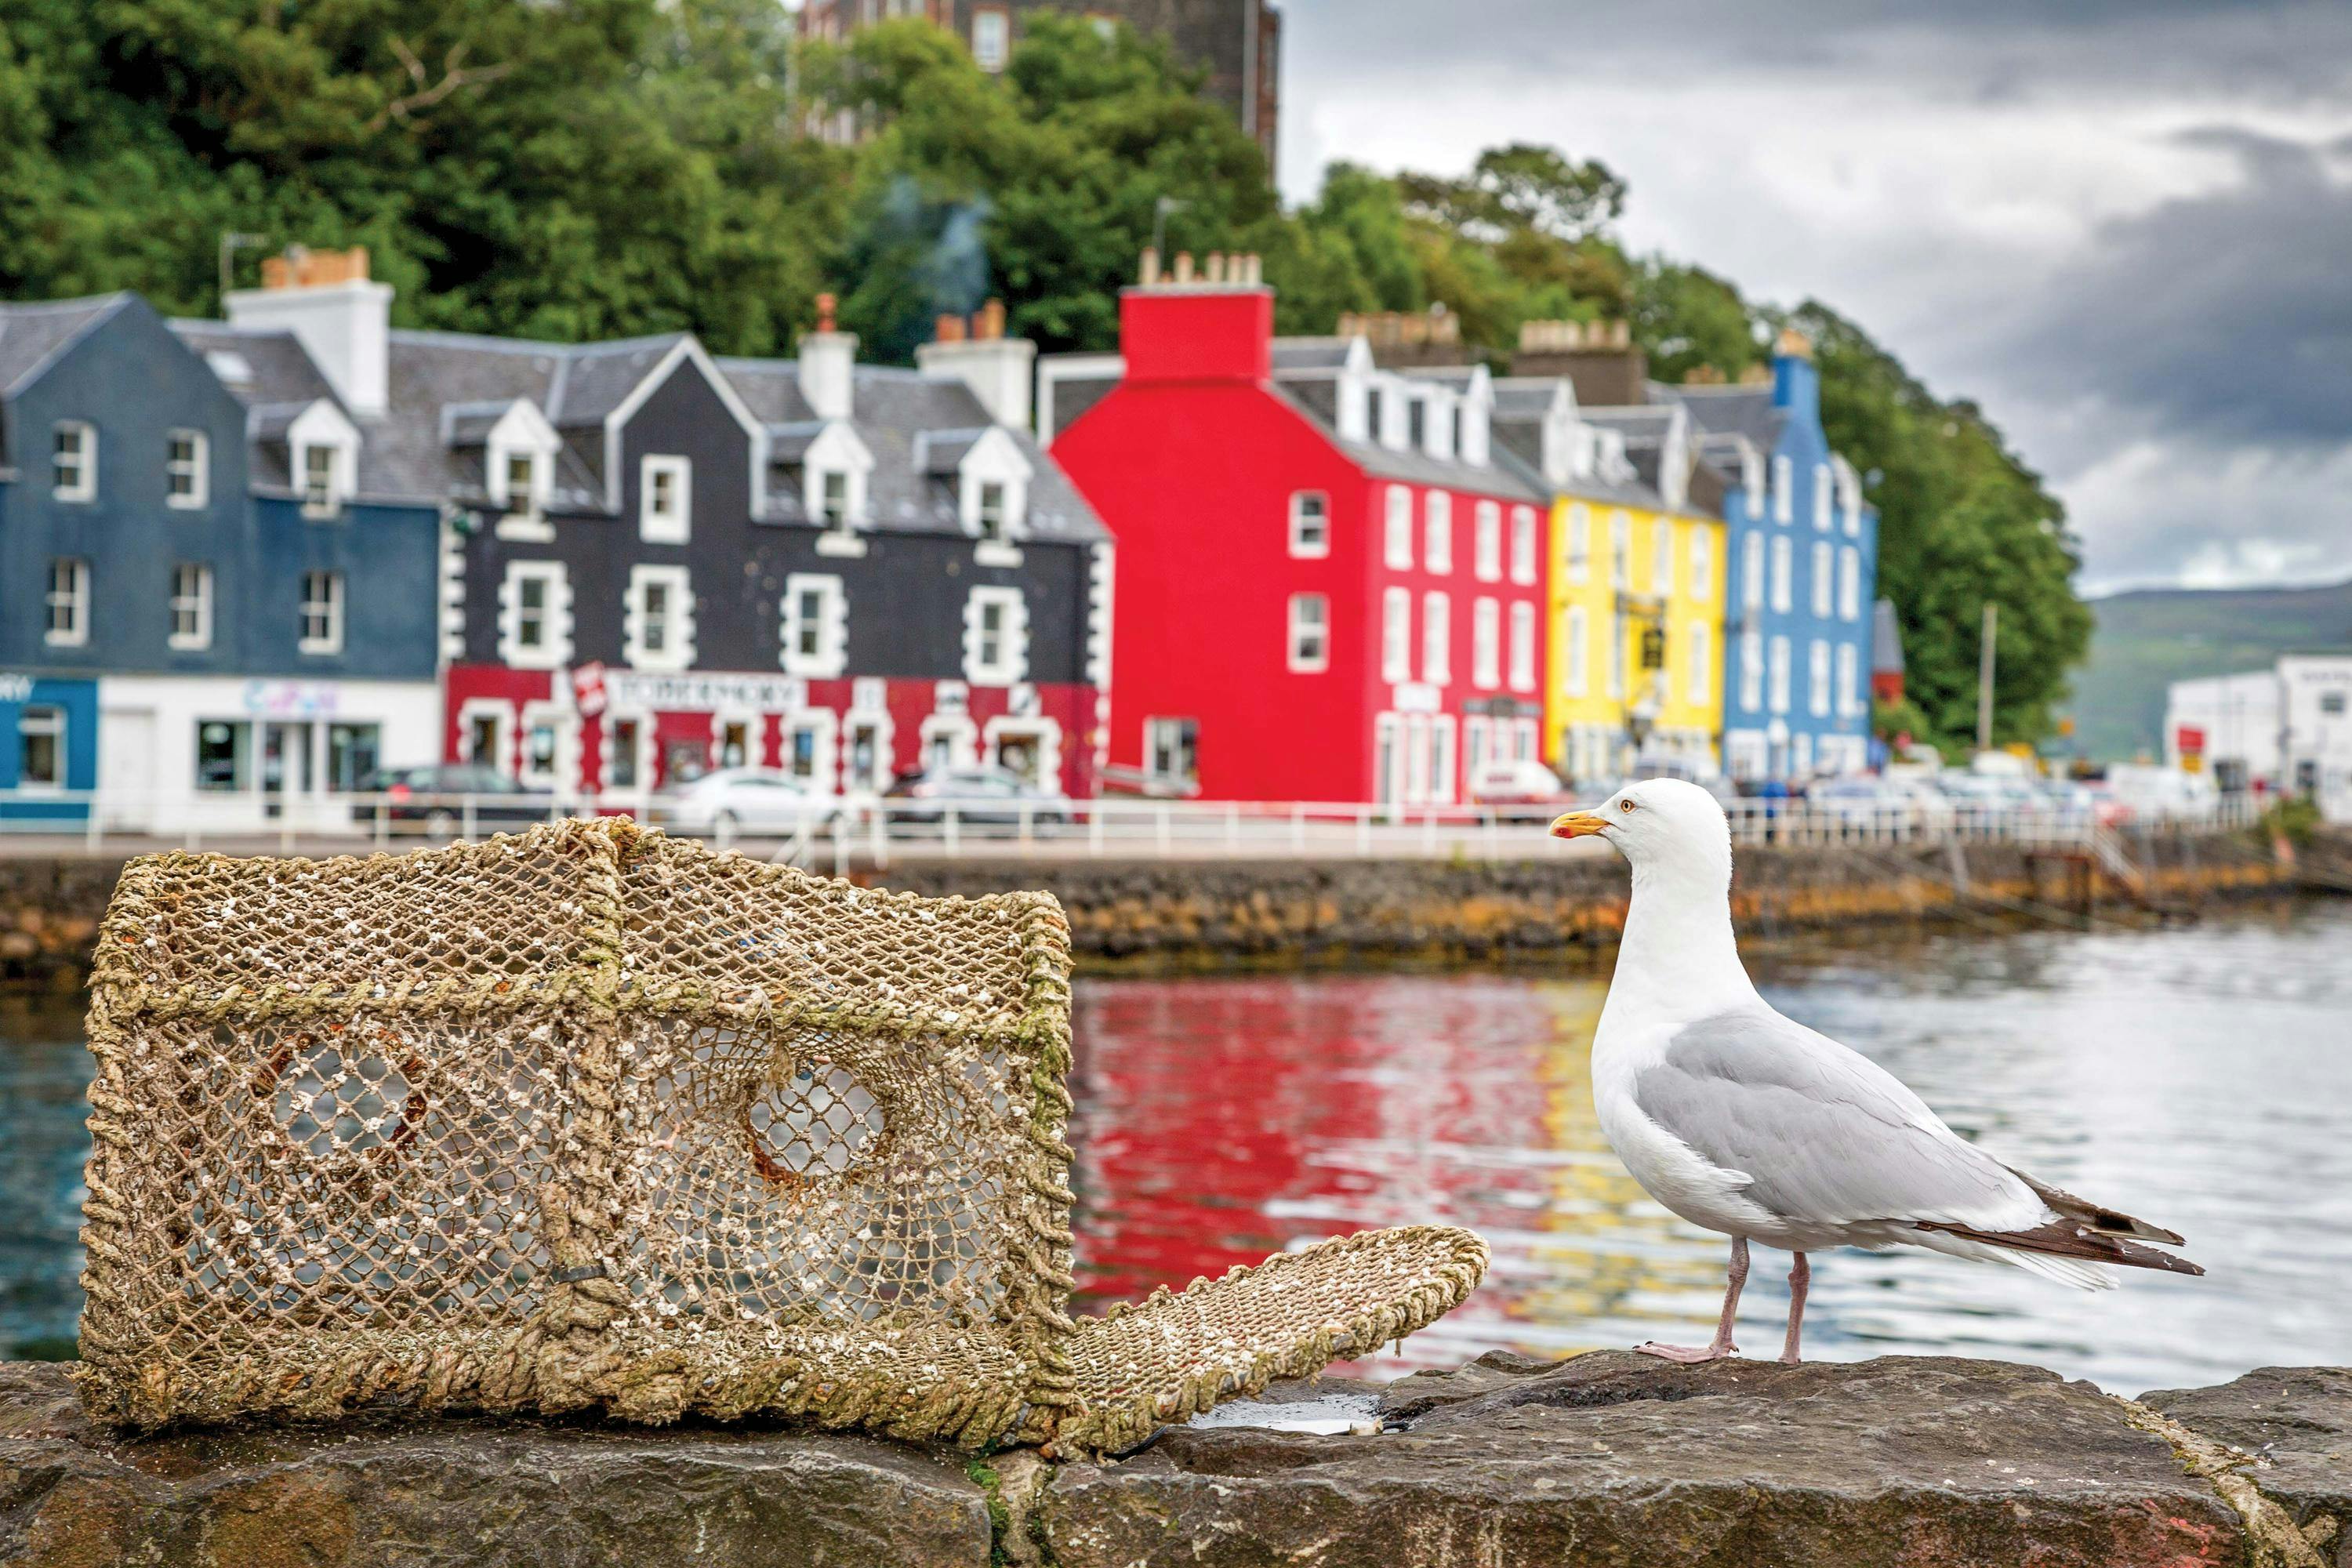 A seagull perched on the pier in front of the colorful village of Tobermory, Isle of Mull, Inner Hebrides, Scotland.